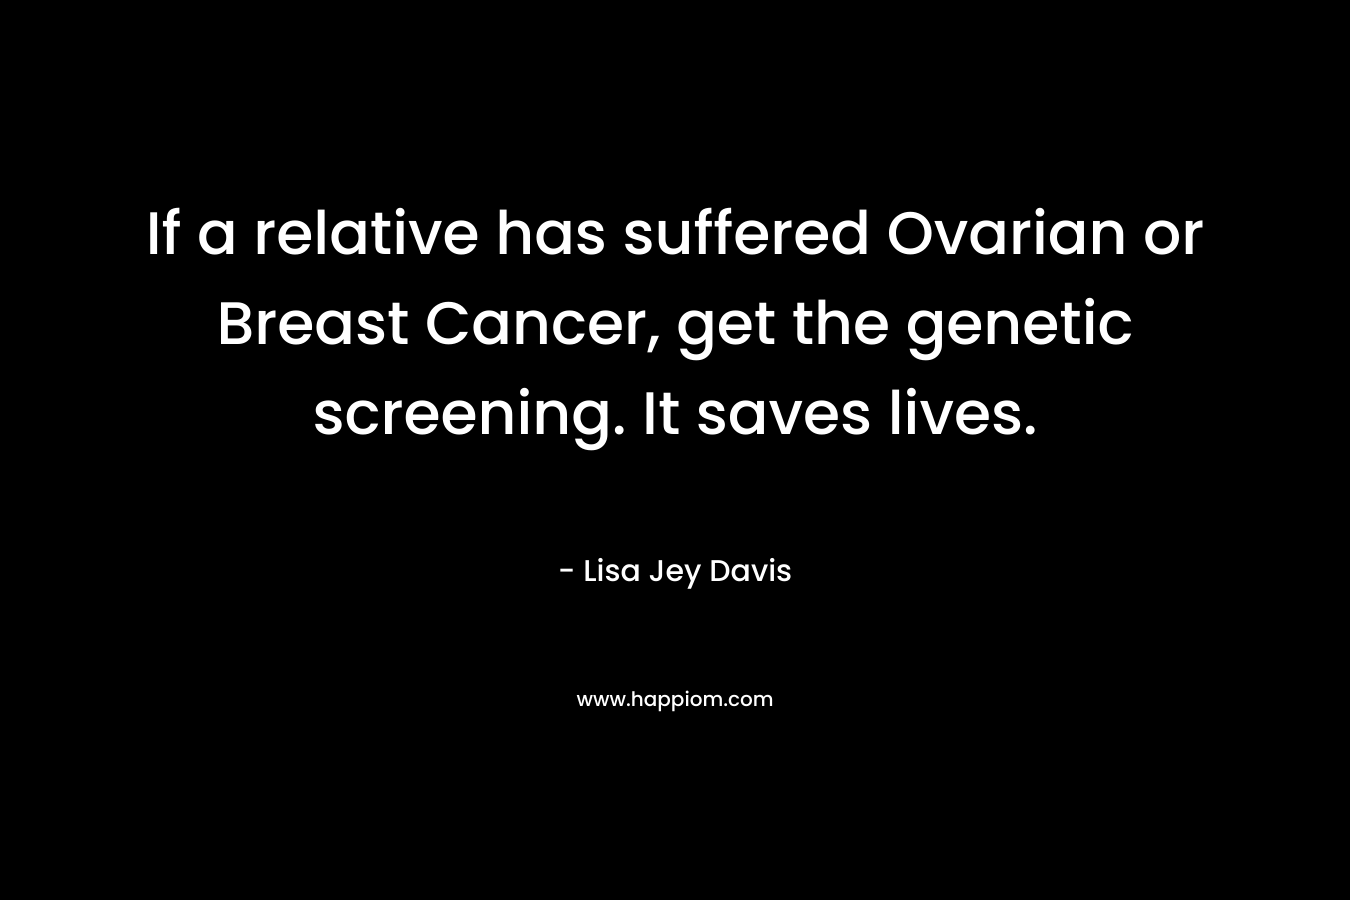 If a relative has suffered Ovarian or Breast Cancer, get the genetic screening. It saves lives. – Lisa Jey Davis